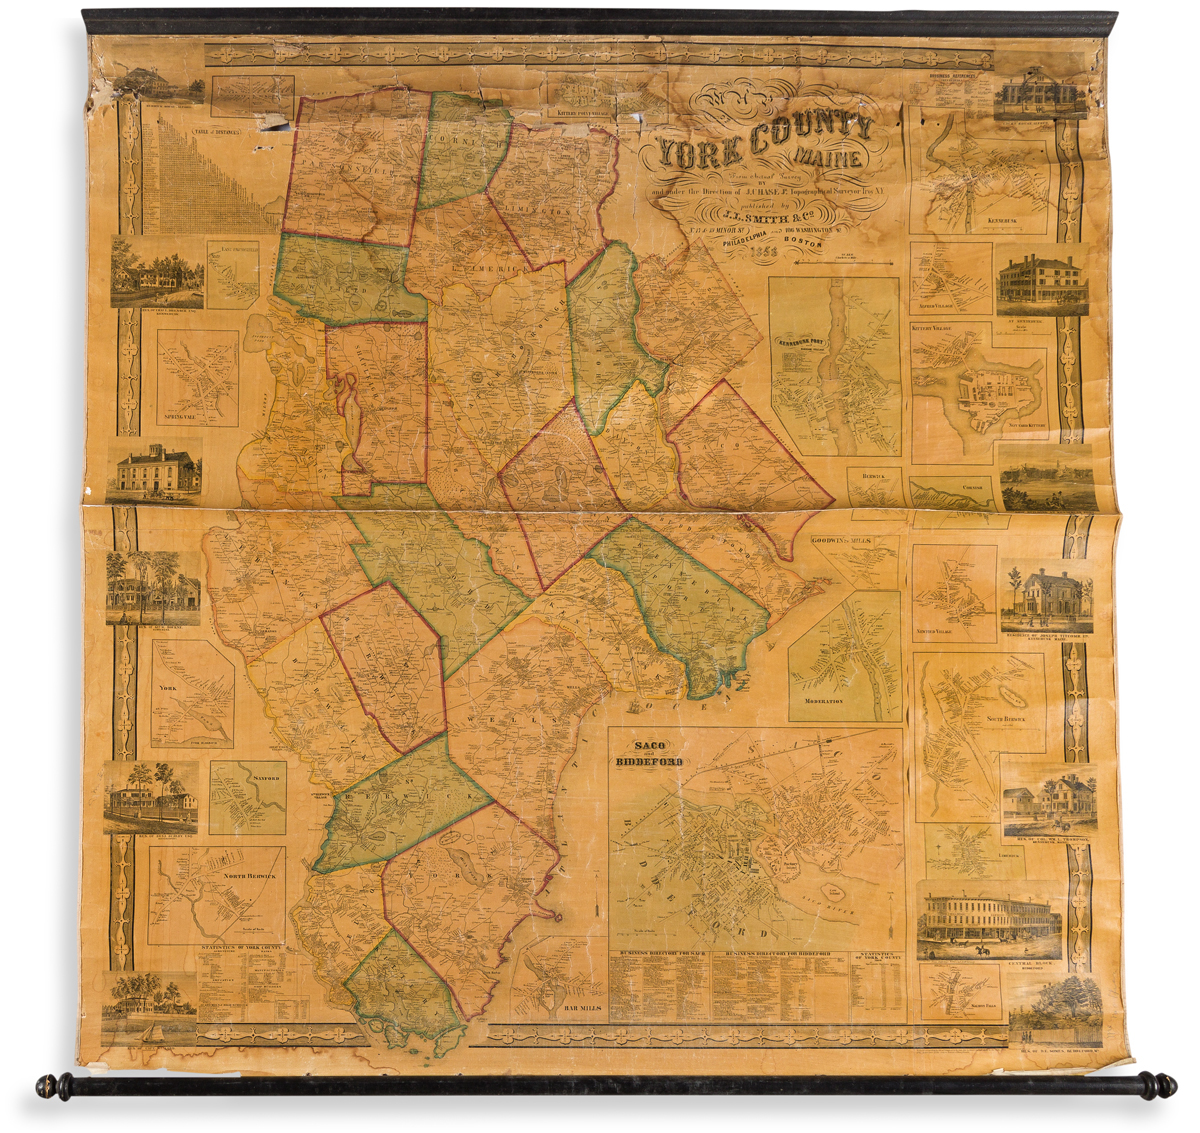 (MAINE.) J. Chase, Jr. Map of York County Maine.